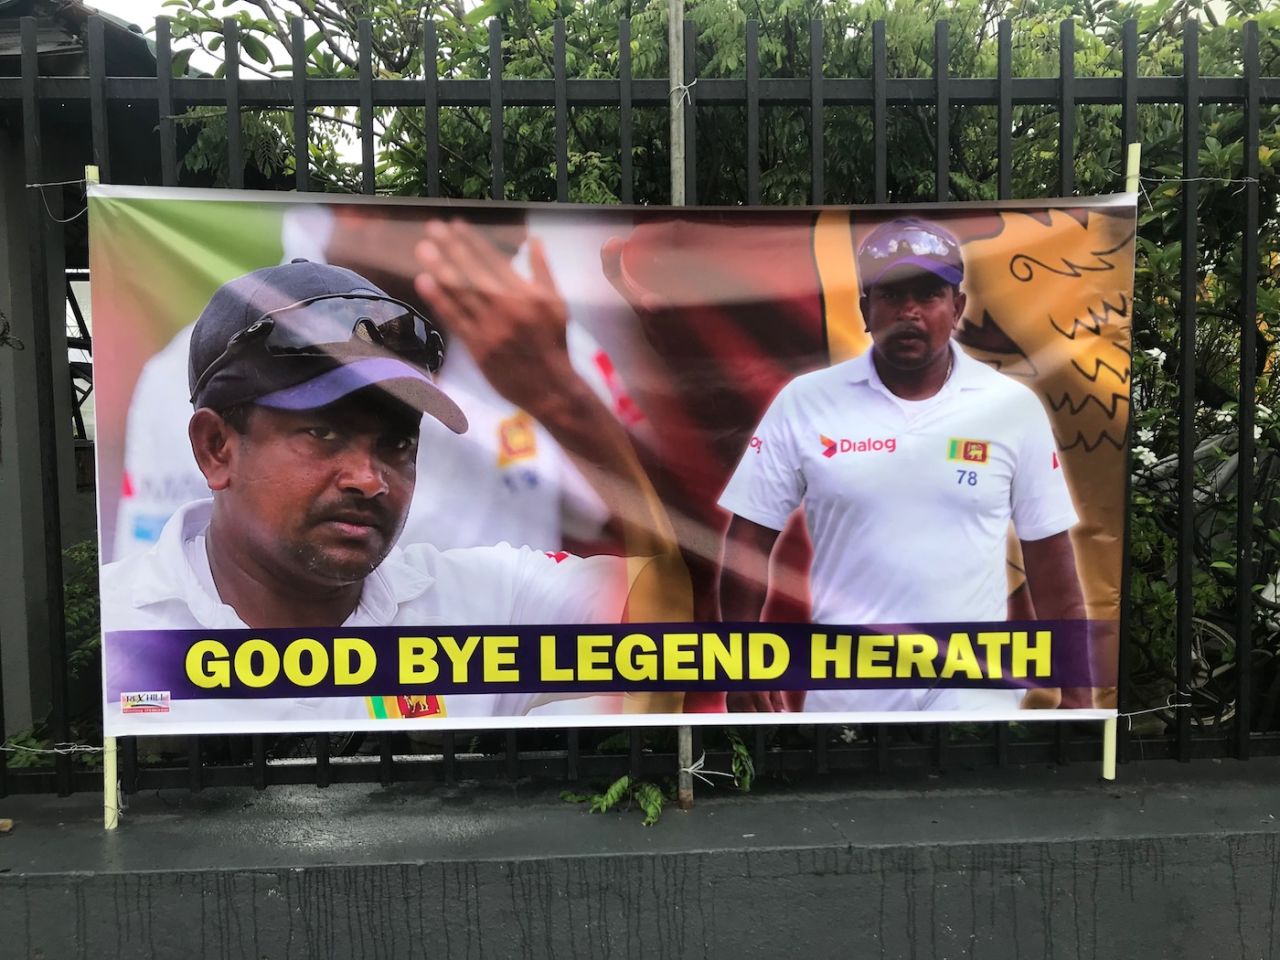 Banners were put up for Rangana Herath before his Test farewell, Galle, November 5, 2018